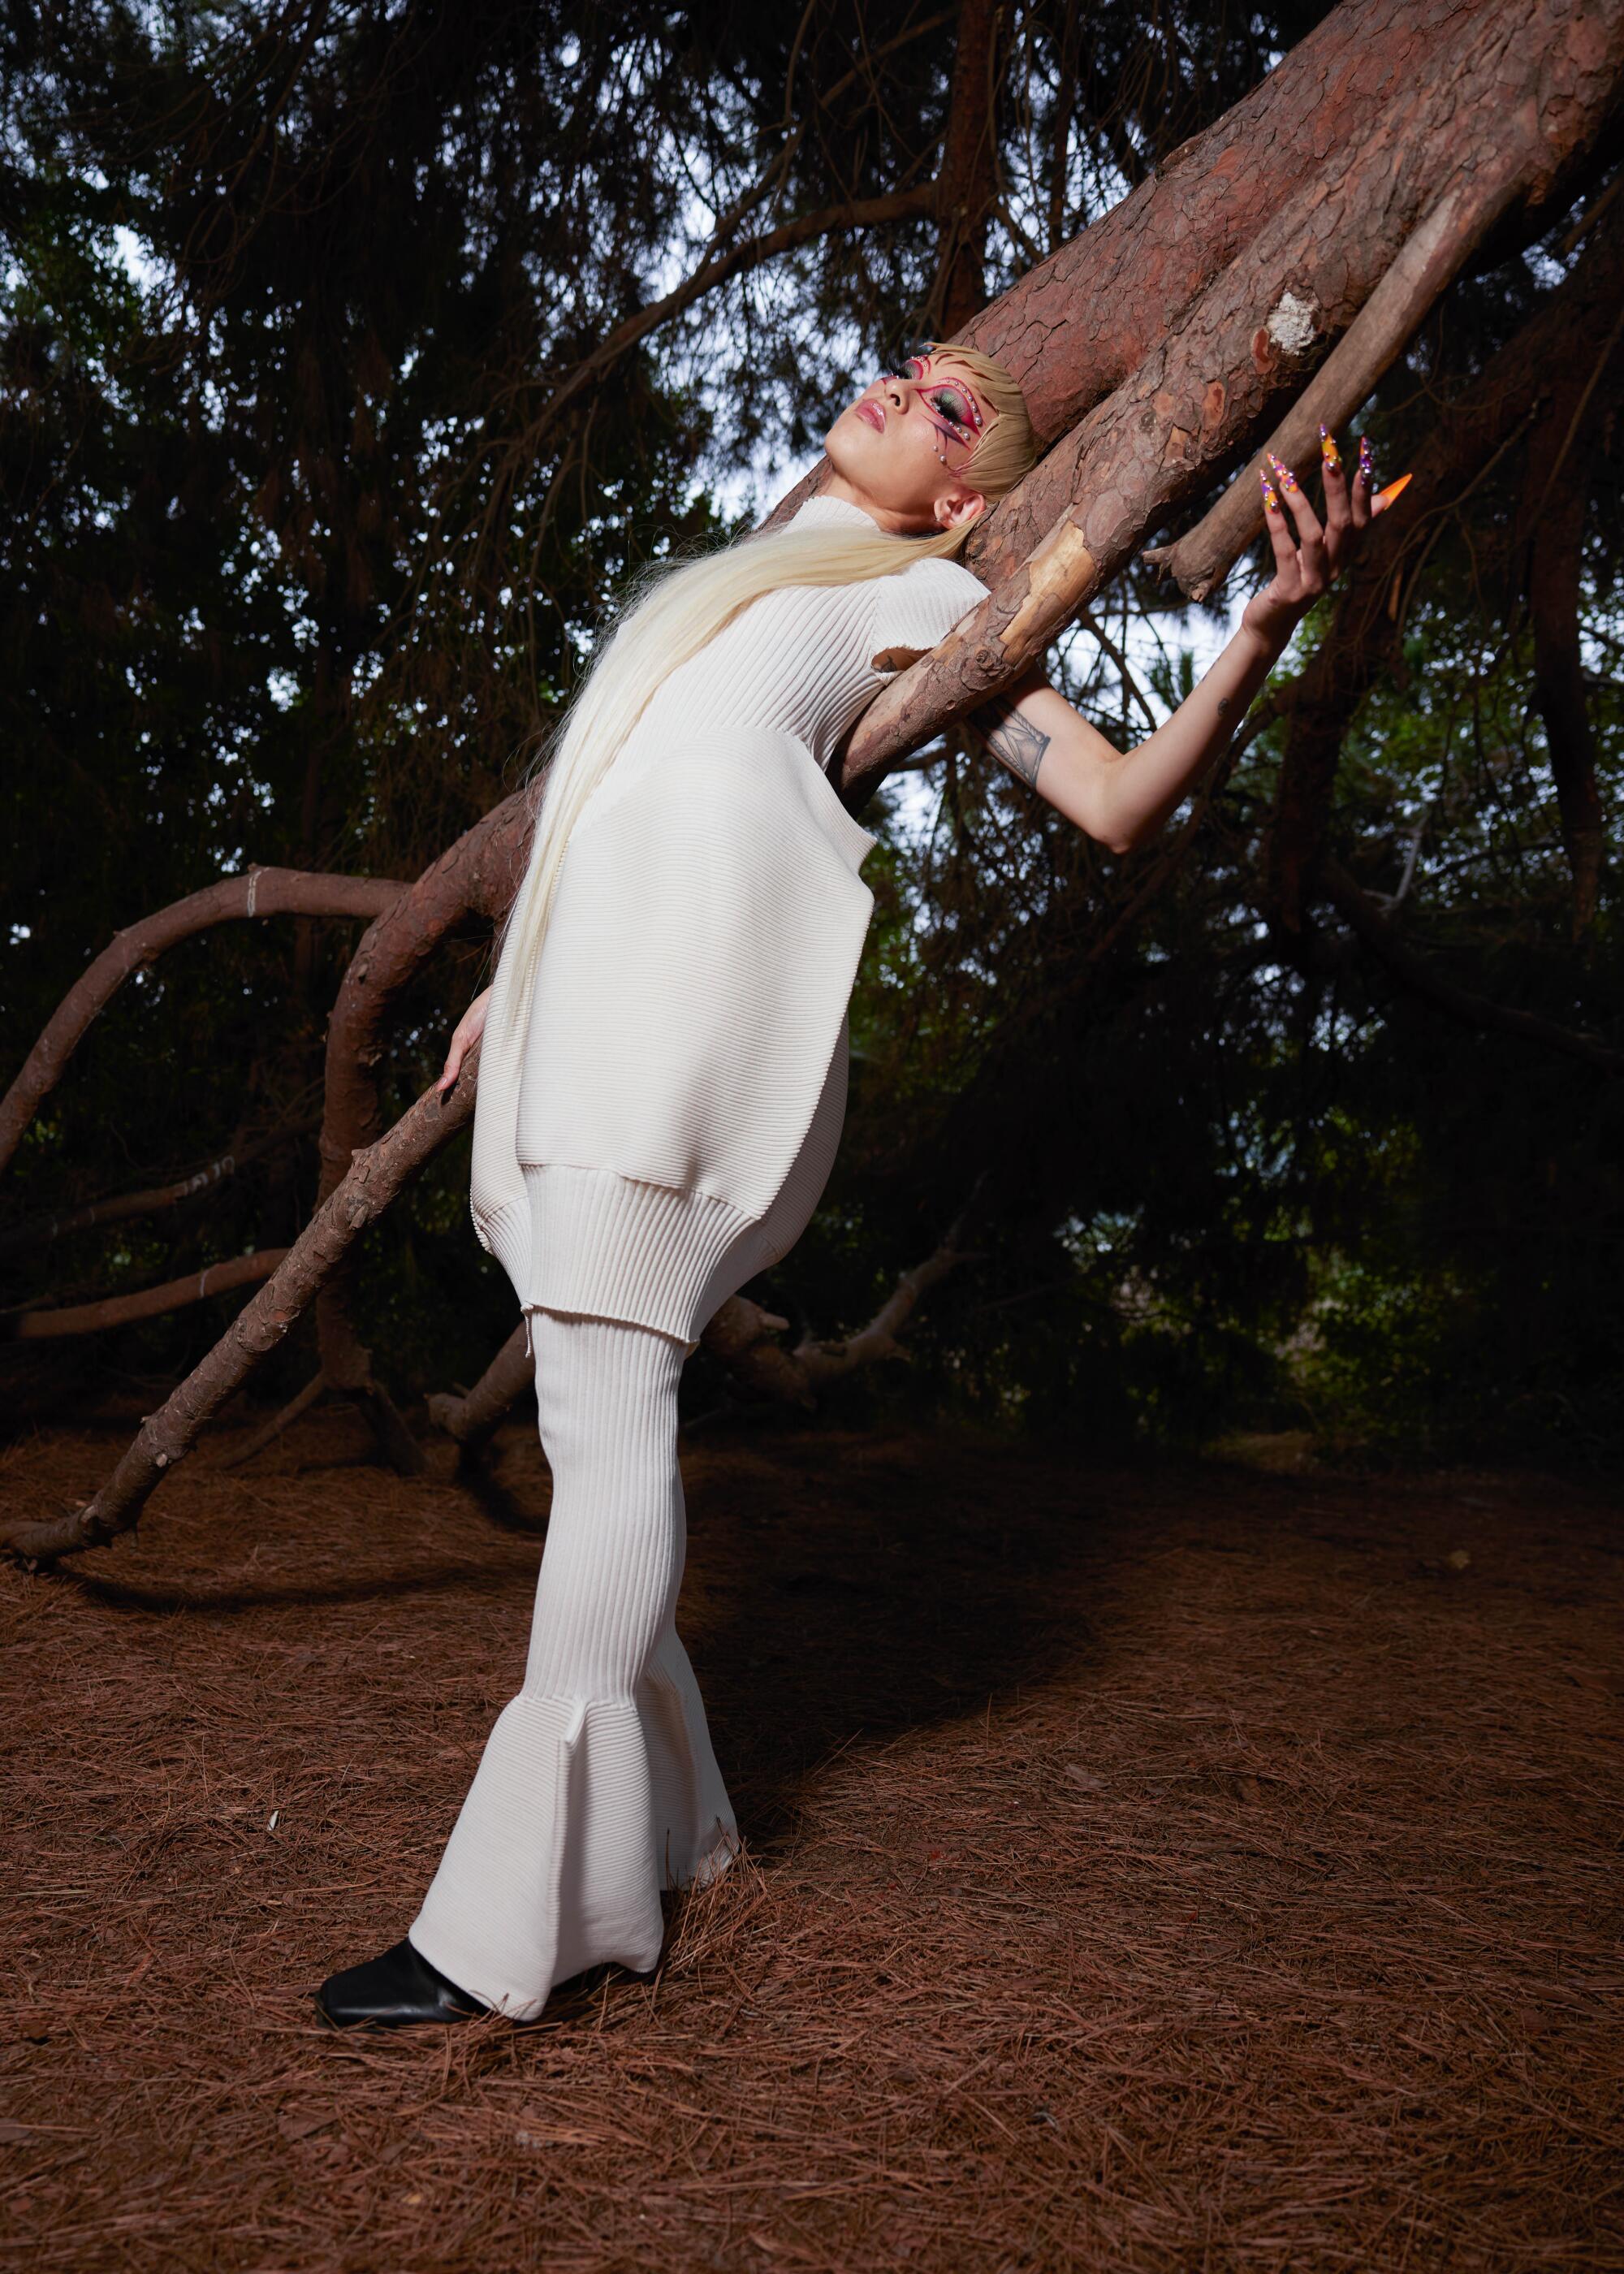 A model in a white Issey Miyake outfit seems almost to become part of the tree branch seemingly growing from her head